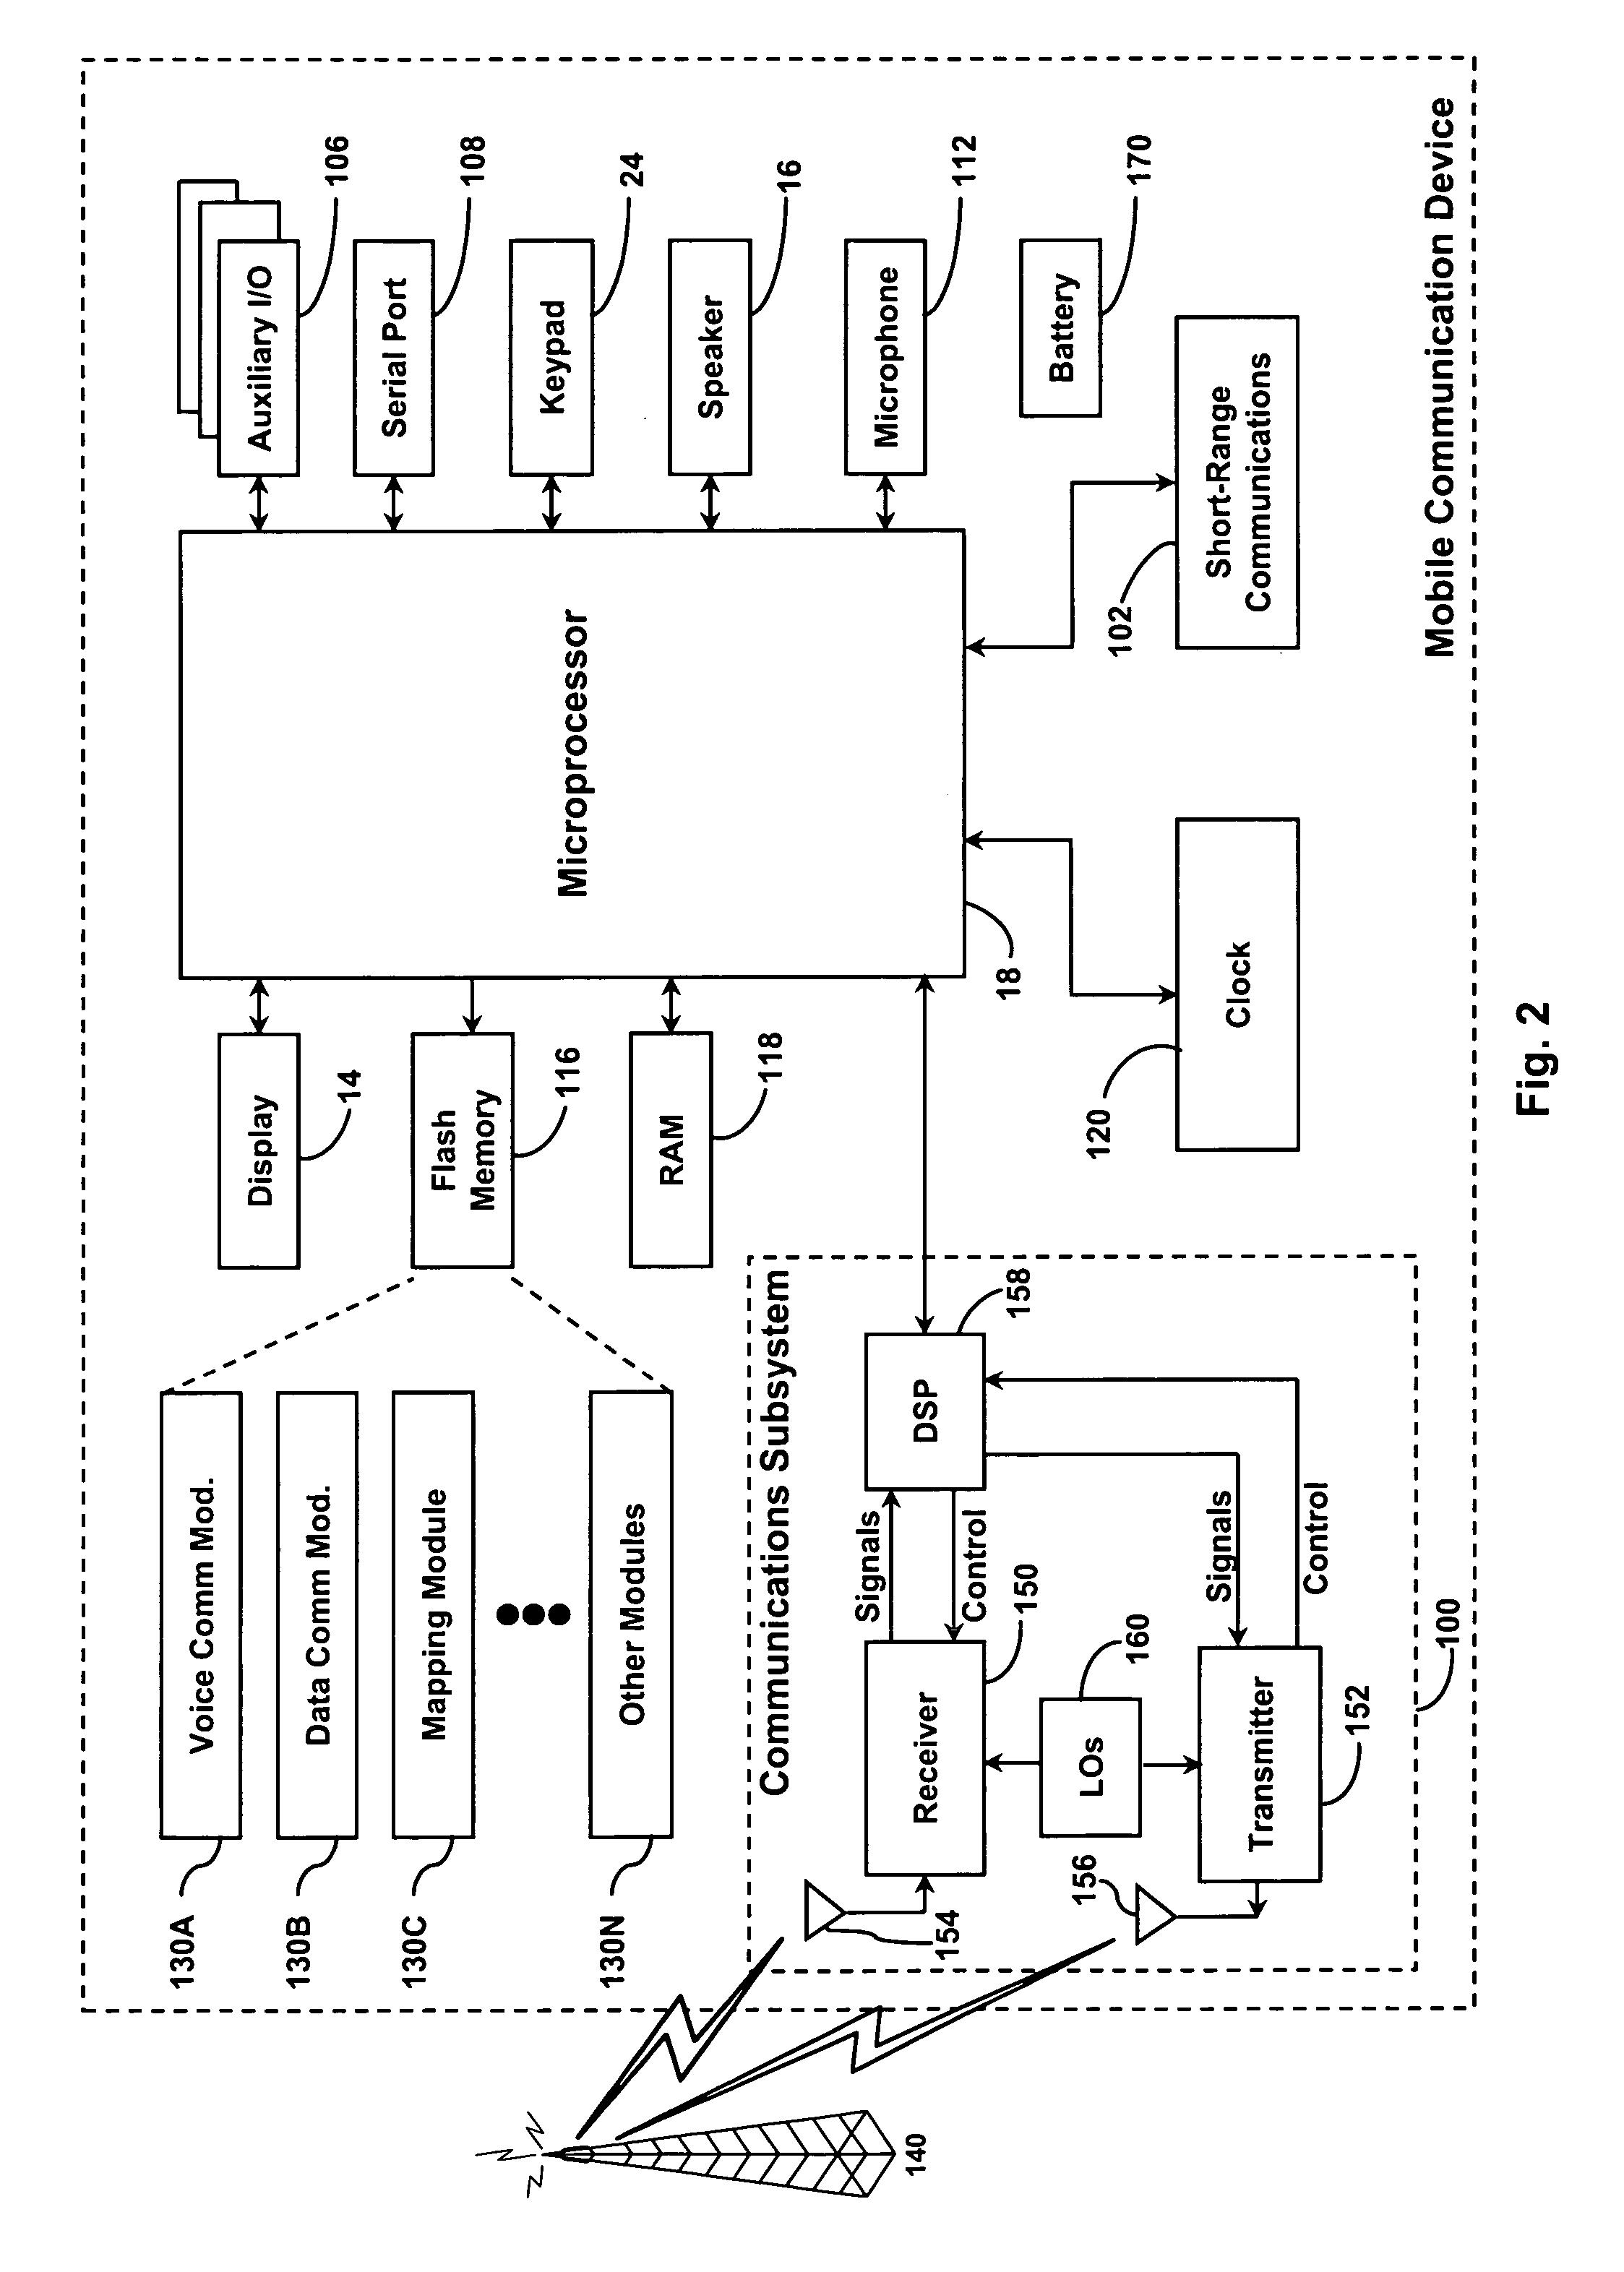 System and method for organizing application indicators on an electronic device